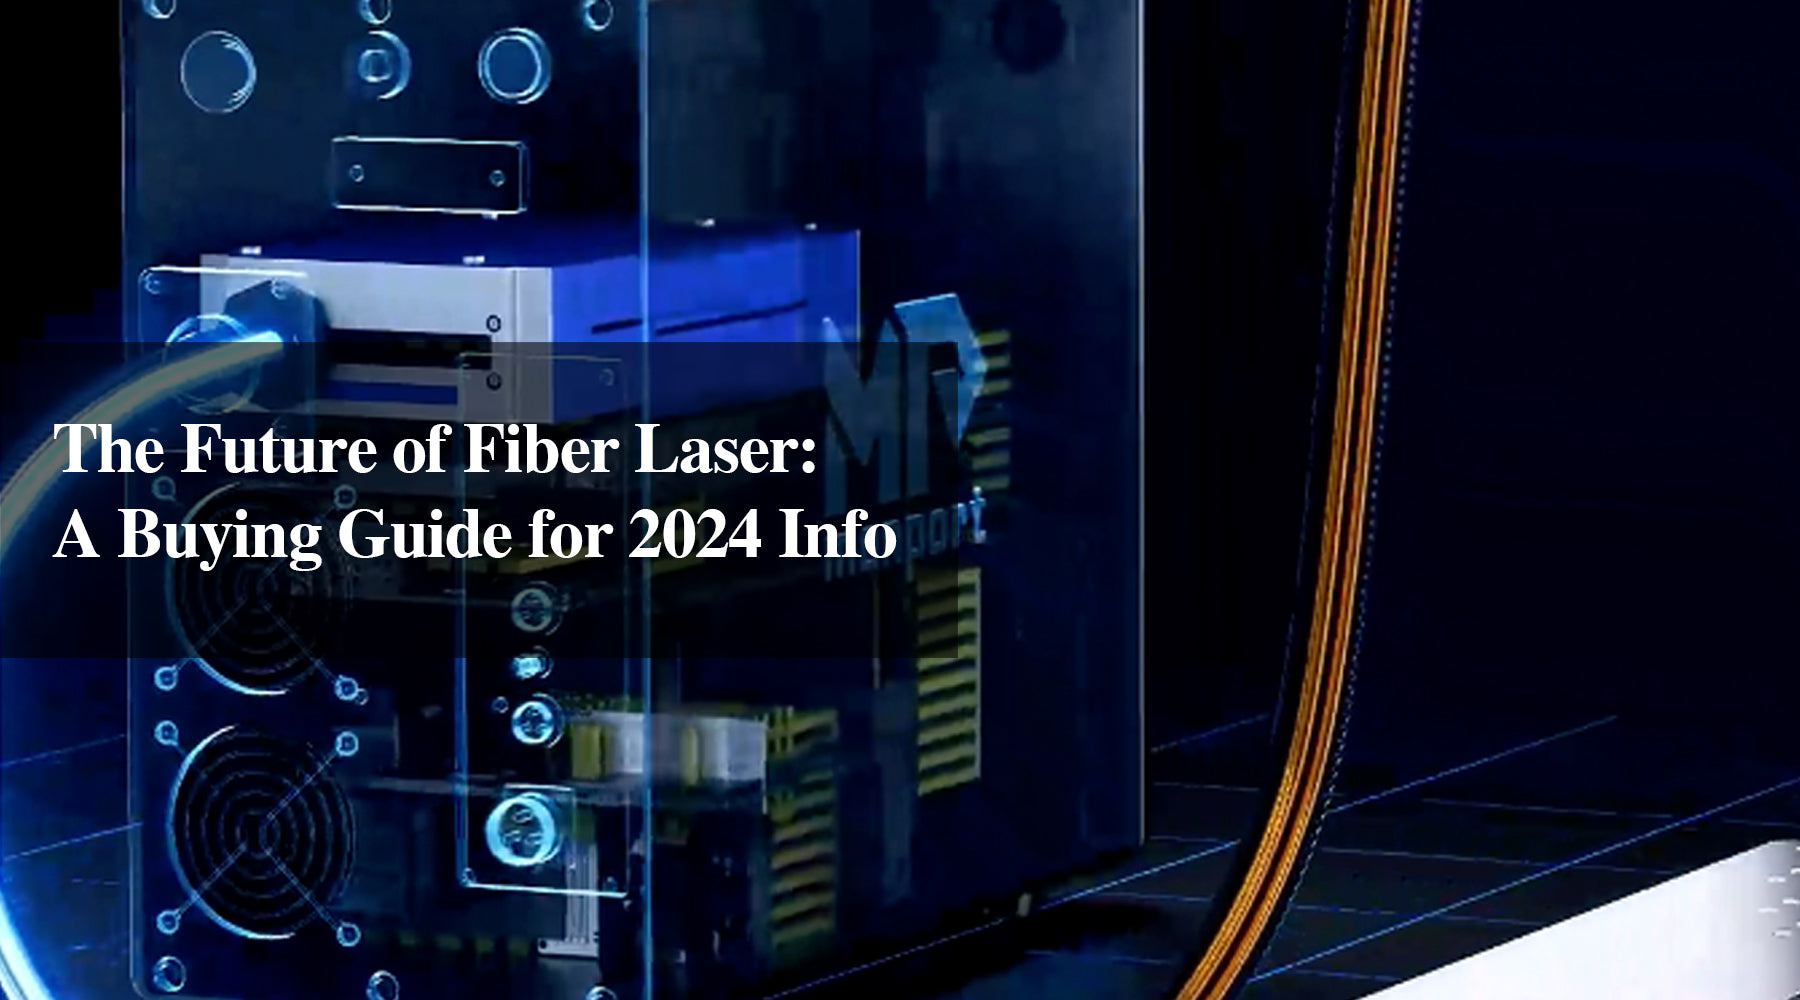 The Future of Fiber Laser: A Buying Guide for 2024